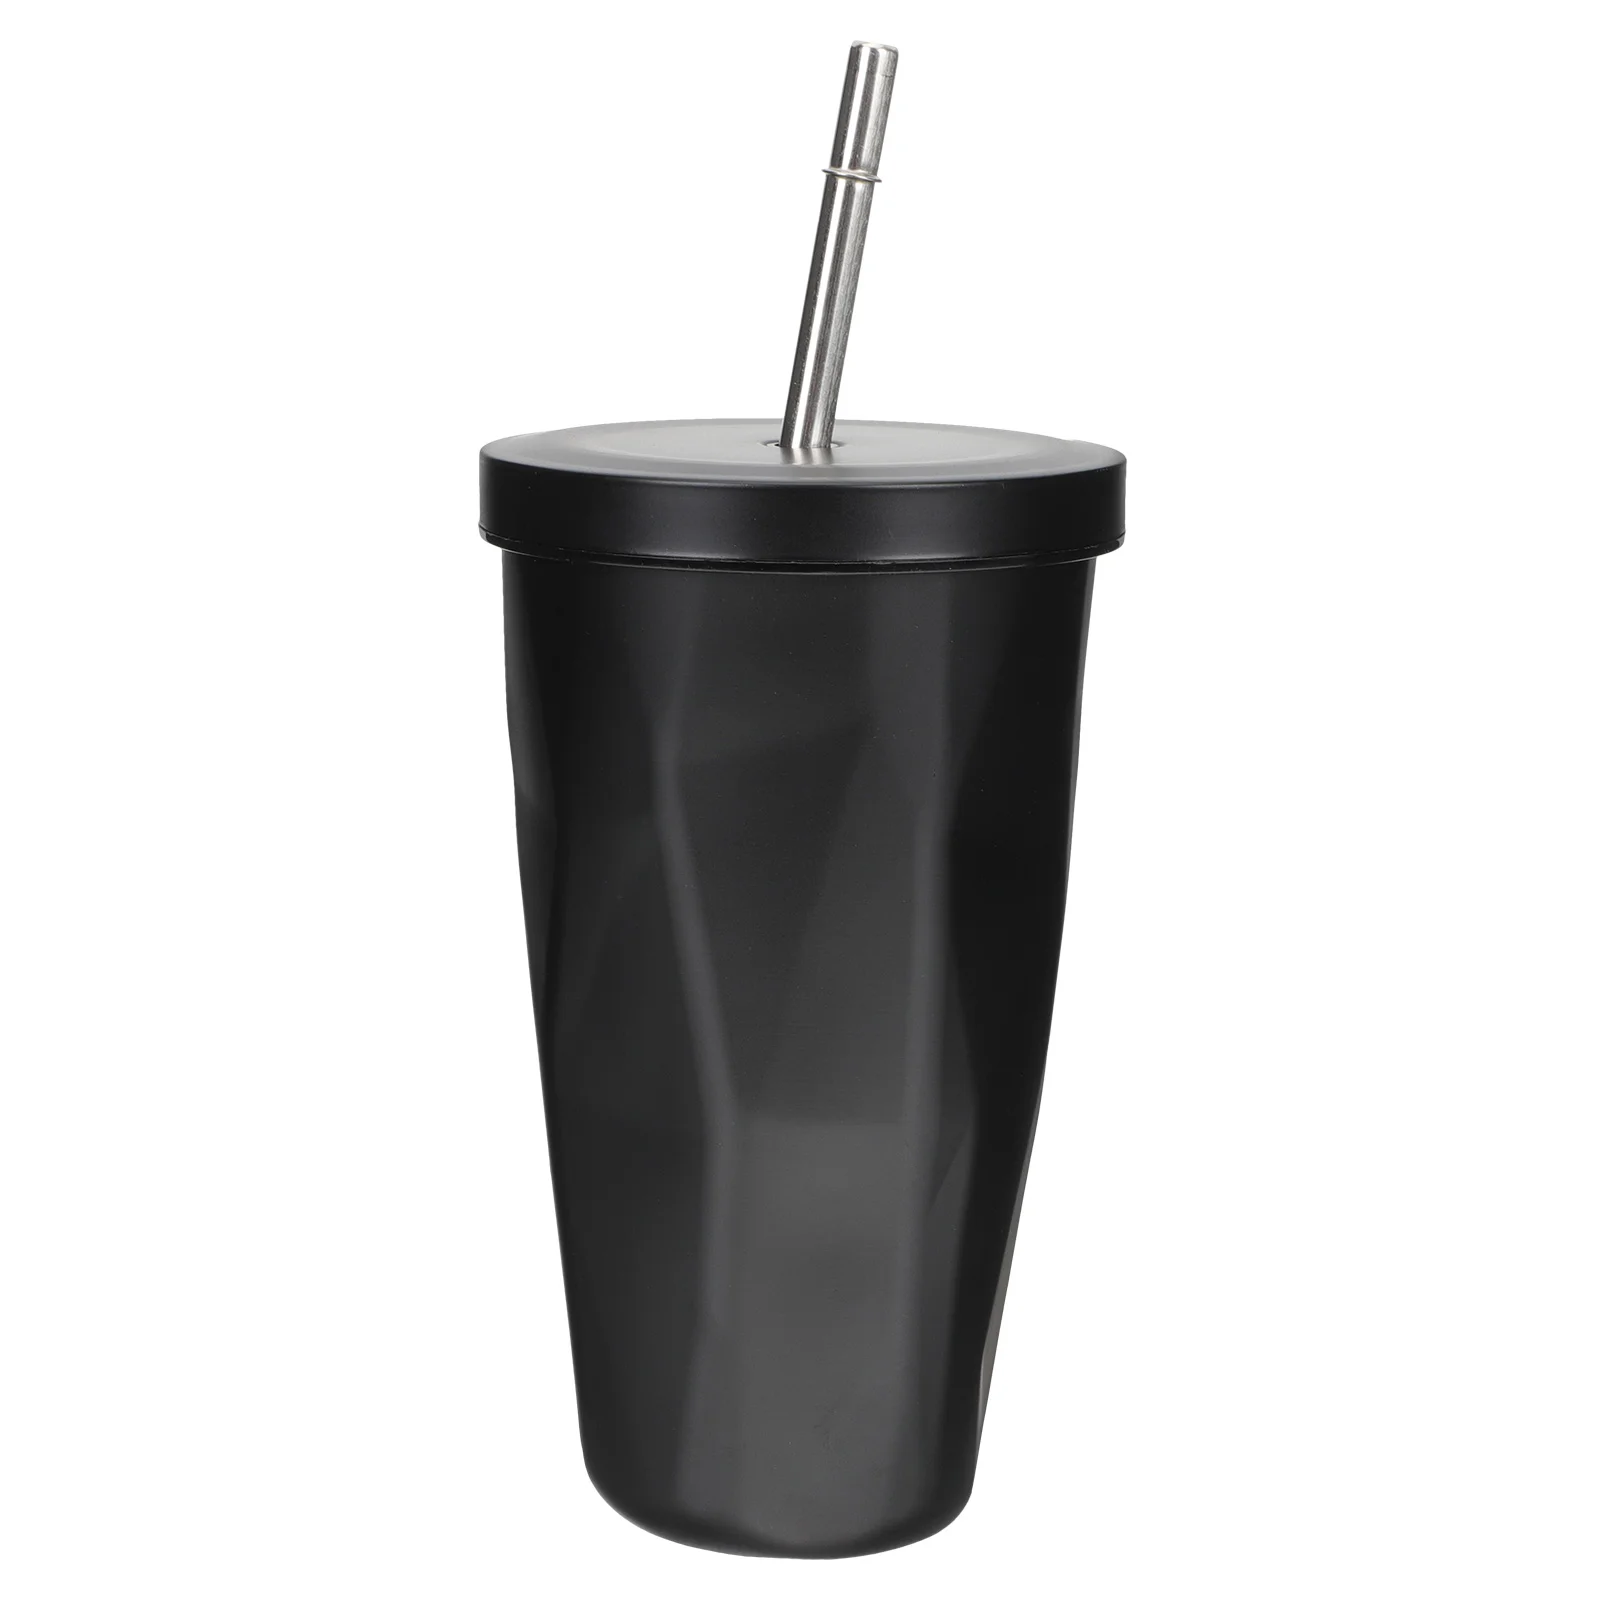 

Tumbler Cupcups Straw Steel Insulated Mug Coffee Stainless Lids Traveloz Drinking Straws Tumblers Kids Metal Sippy Water Mugs